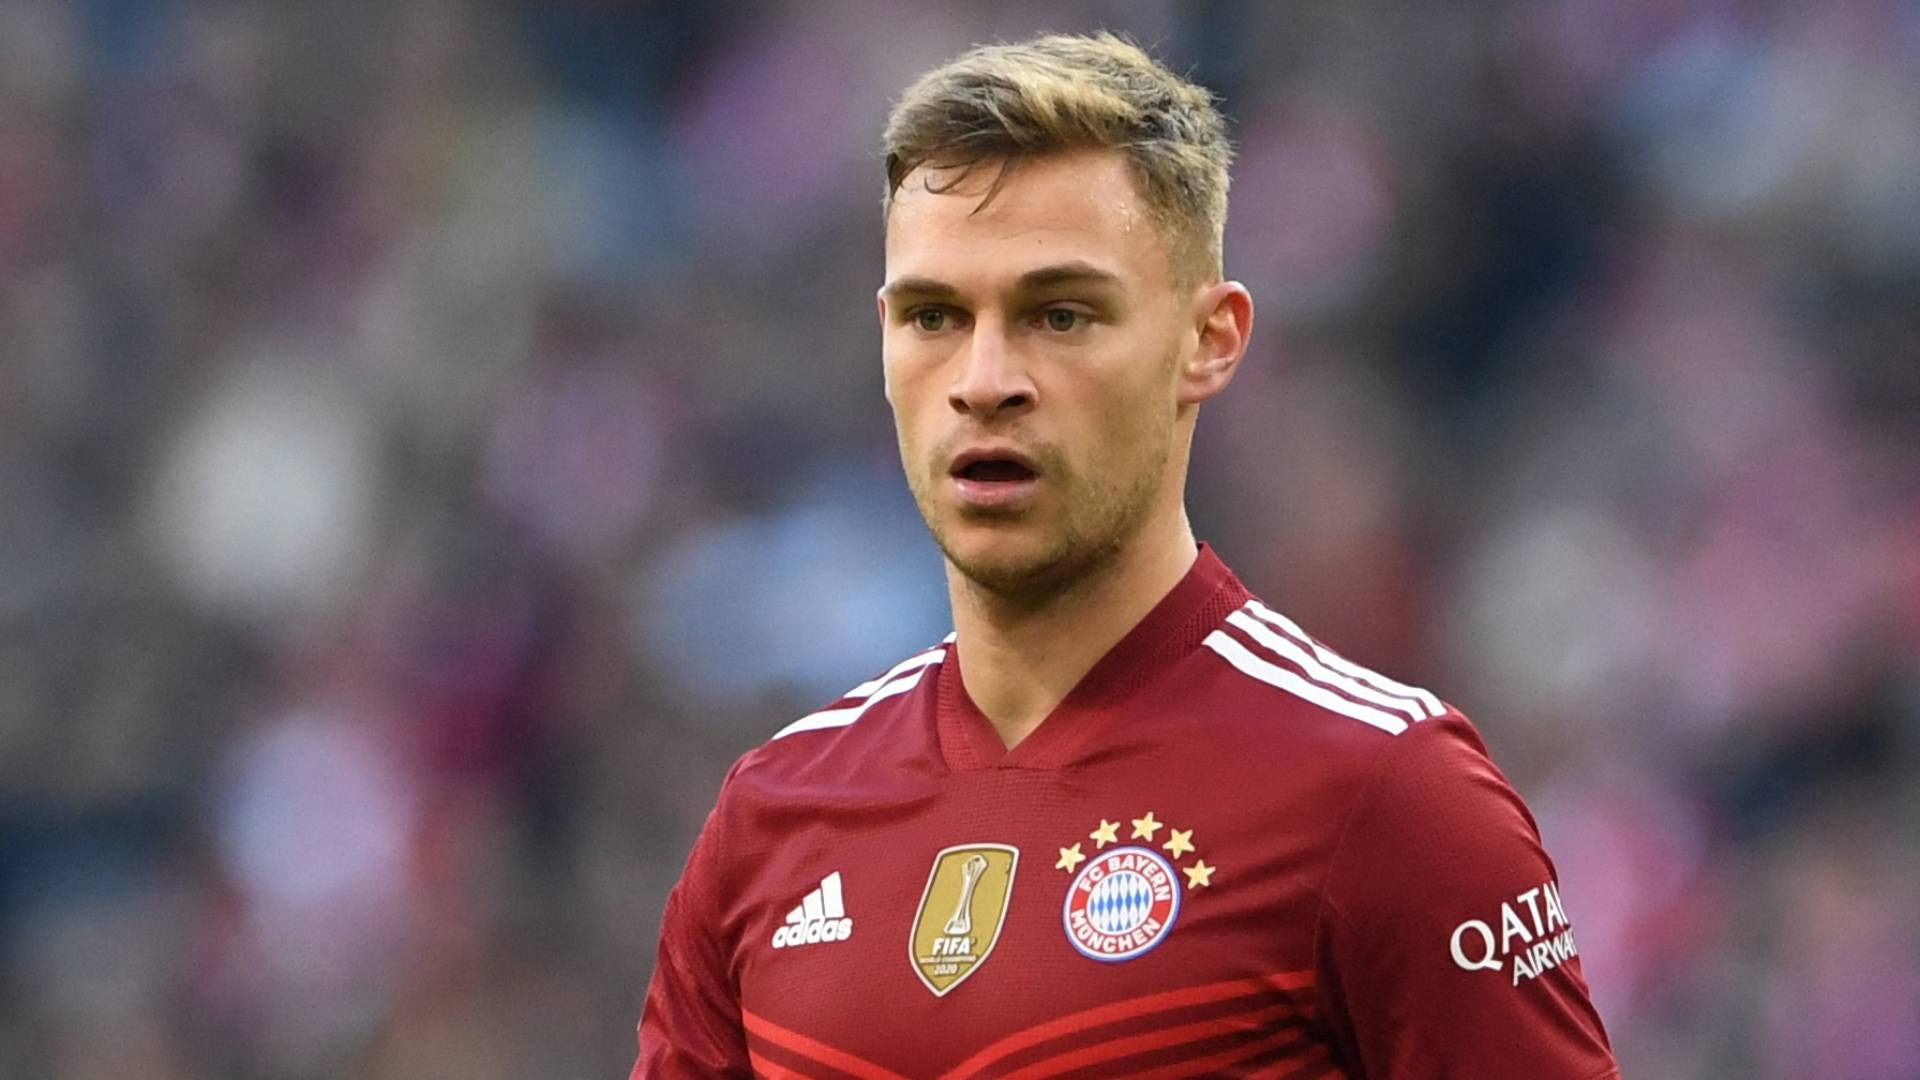 Kimmich's Bayern future in doubt